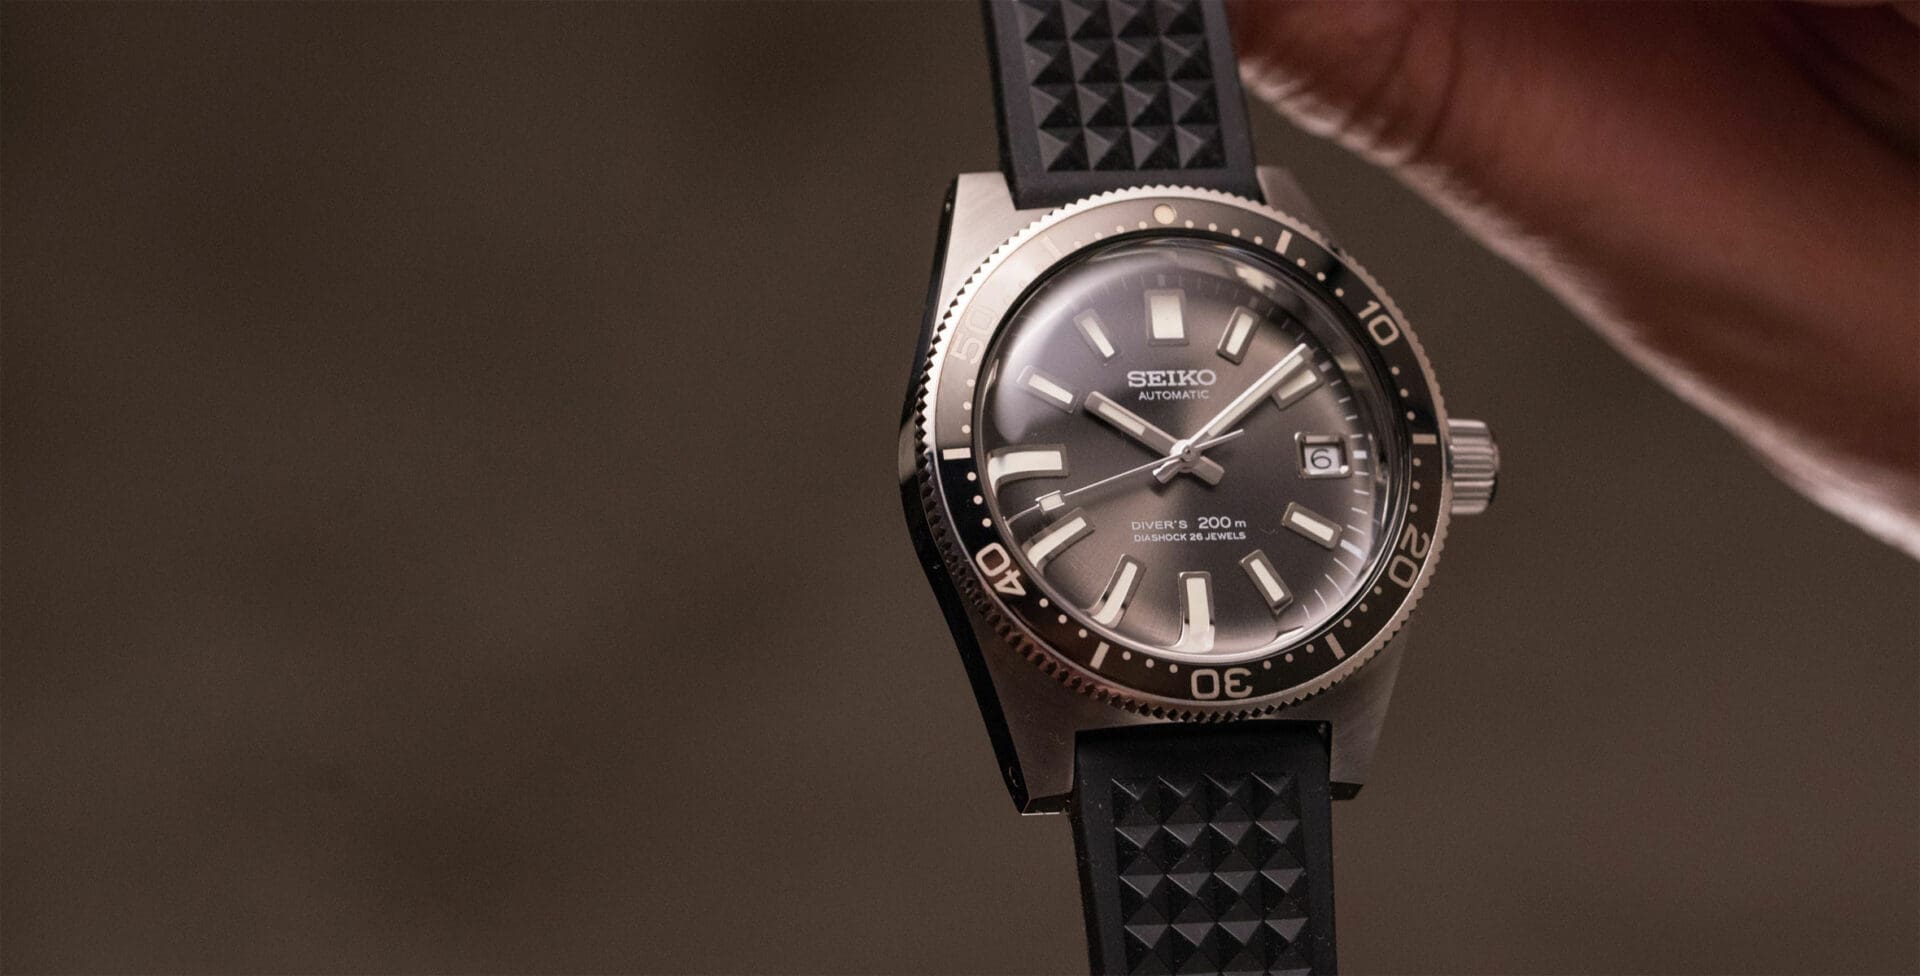 IN-DEPTH: Is the Seiko Prospex SLA017 62MAS re-creation their best dive watch ever?